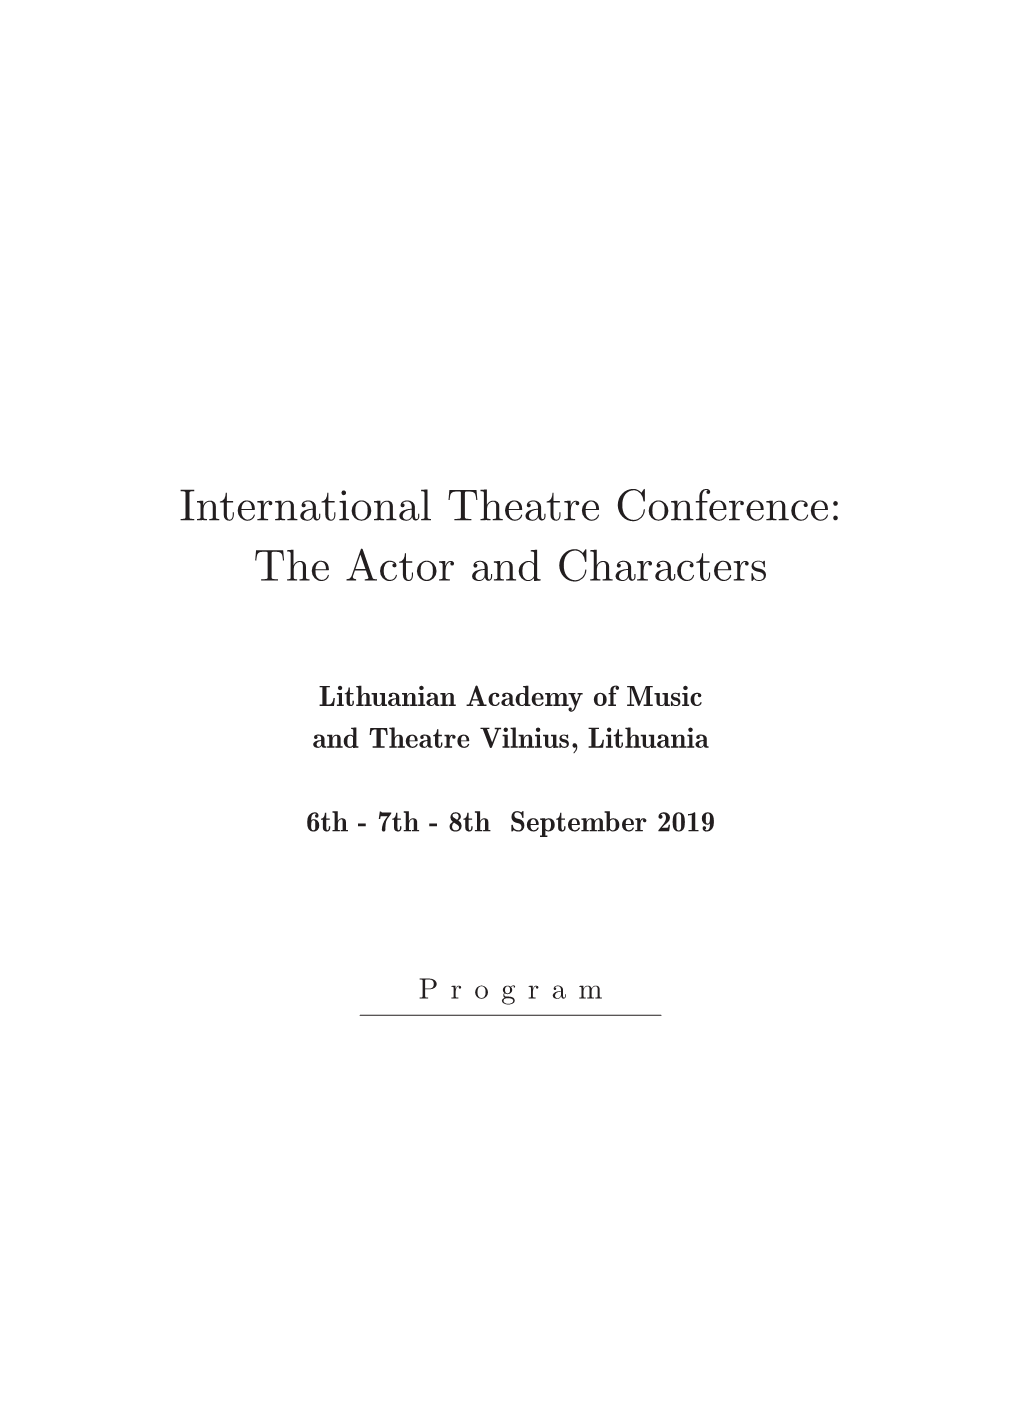 International Theatre Conference: the Actor and Characters